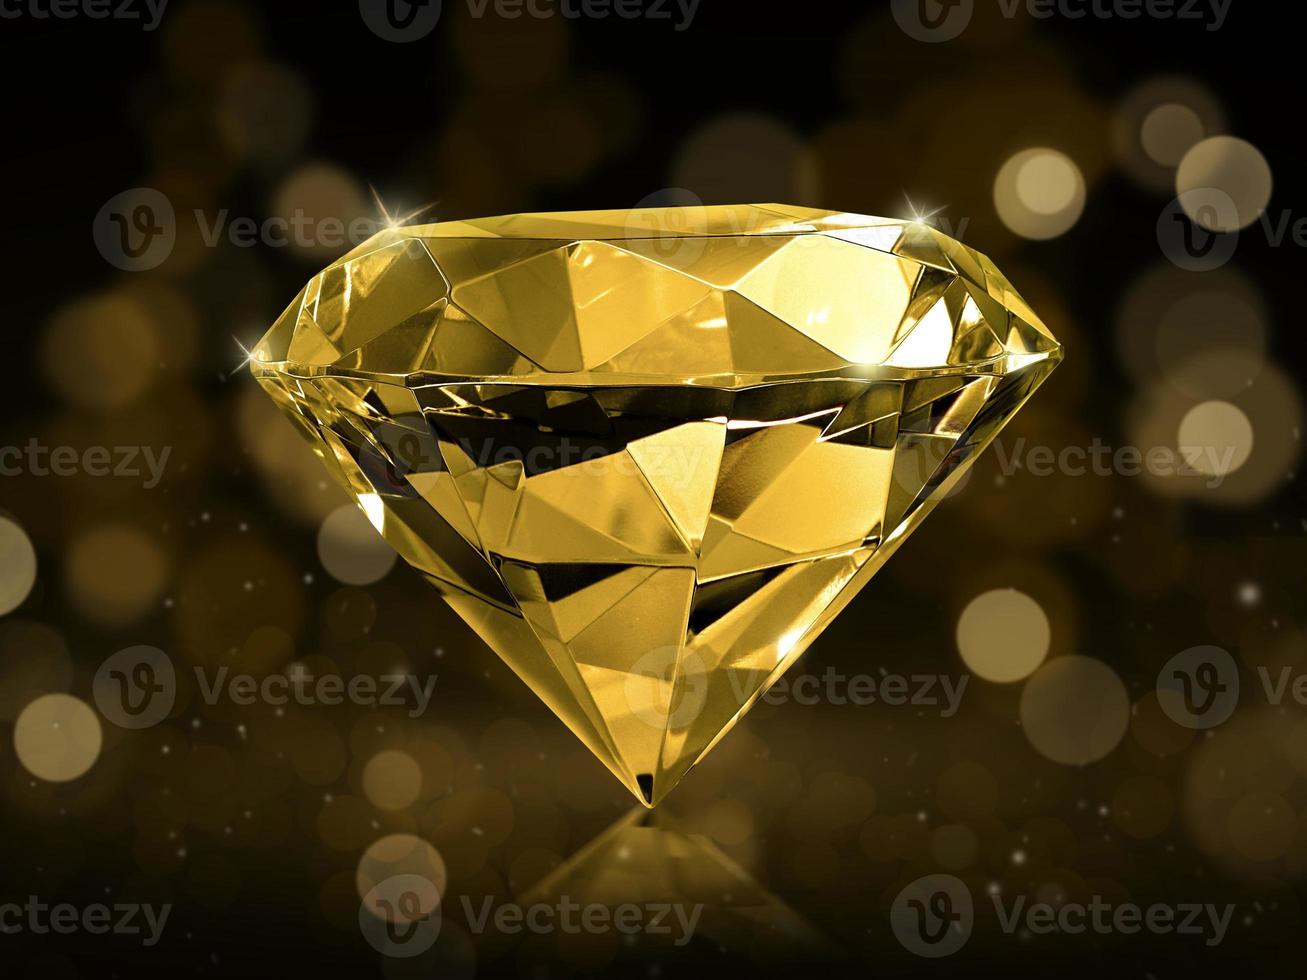 Dazzling diamond on gold abstract bokeh background photo